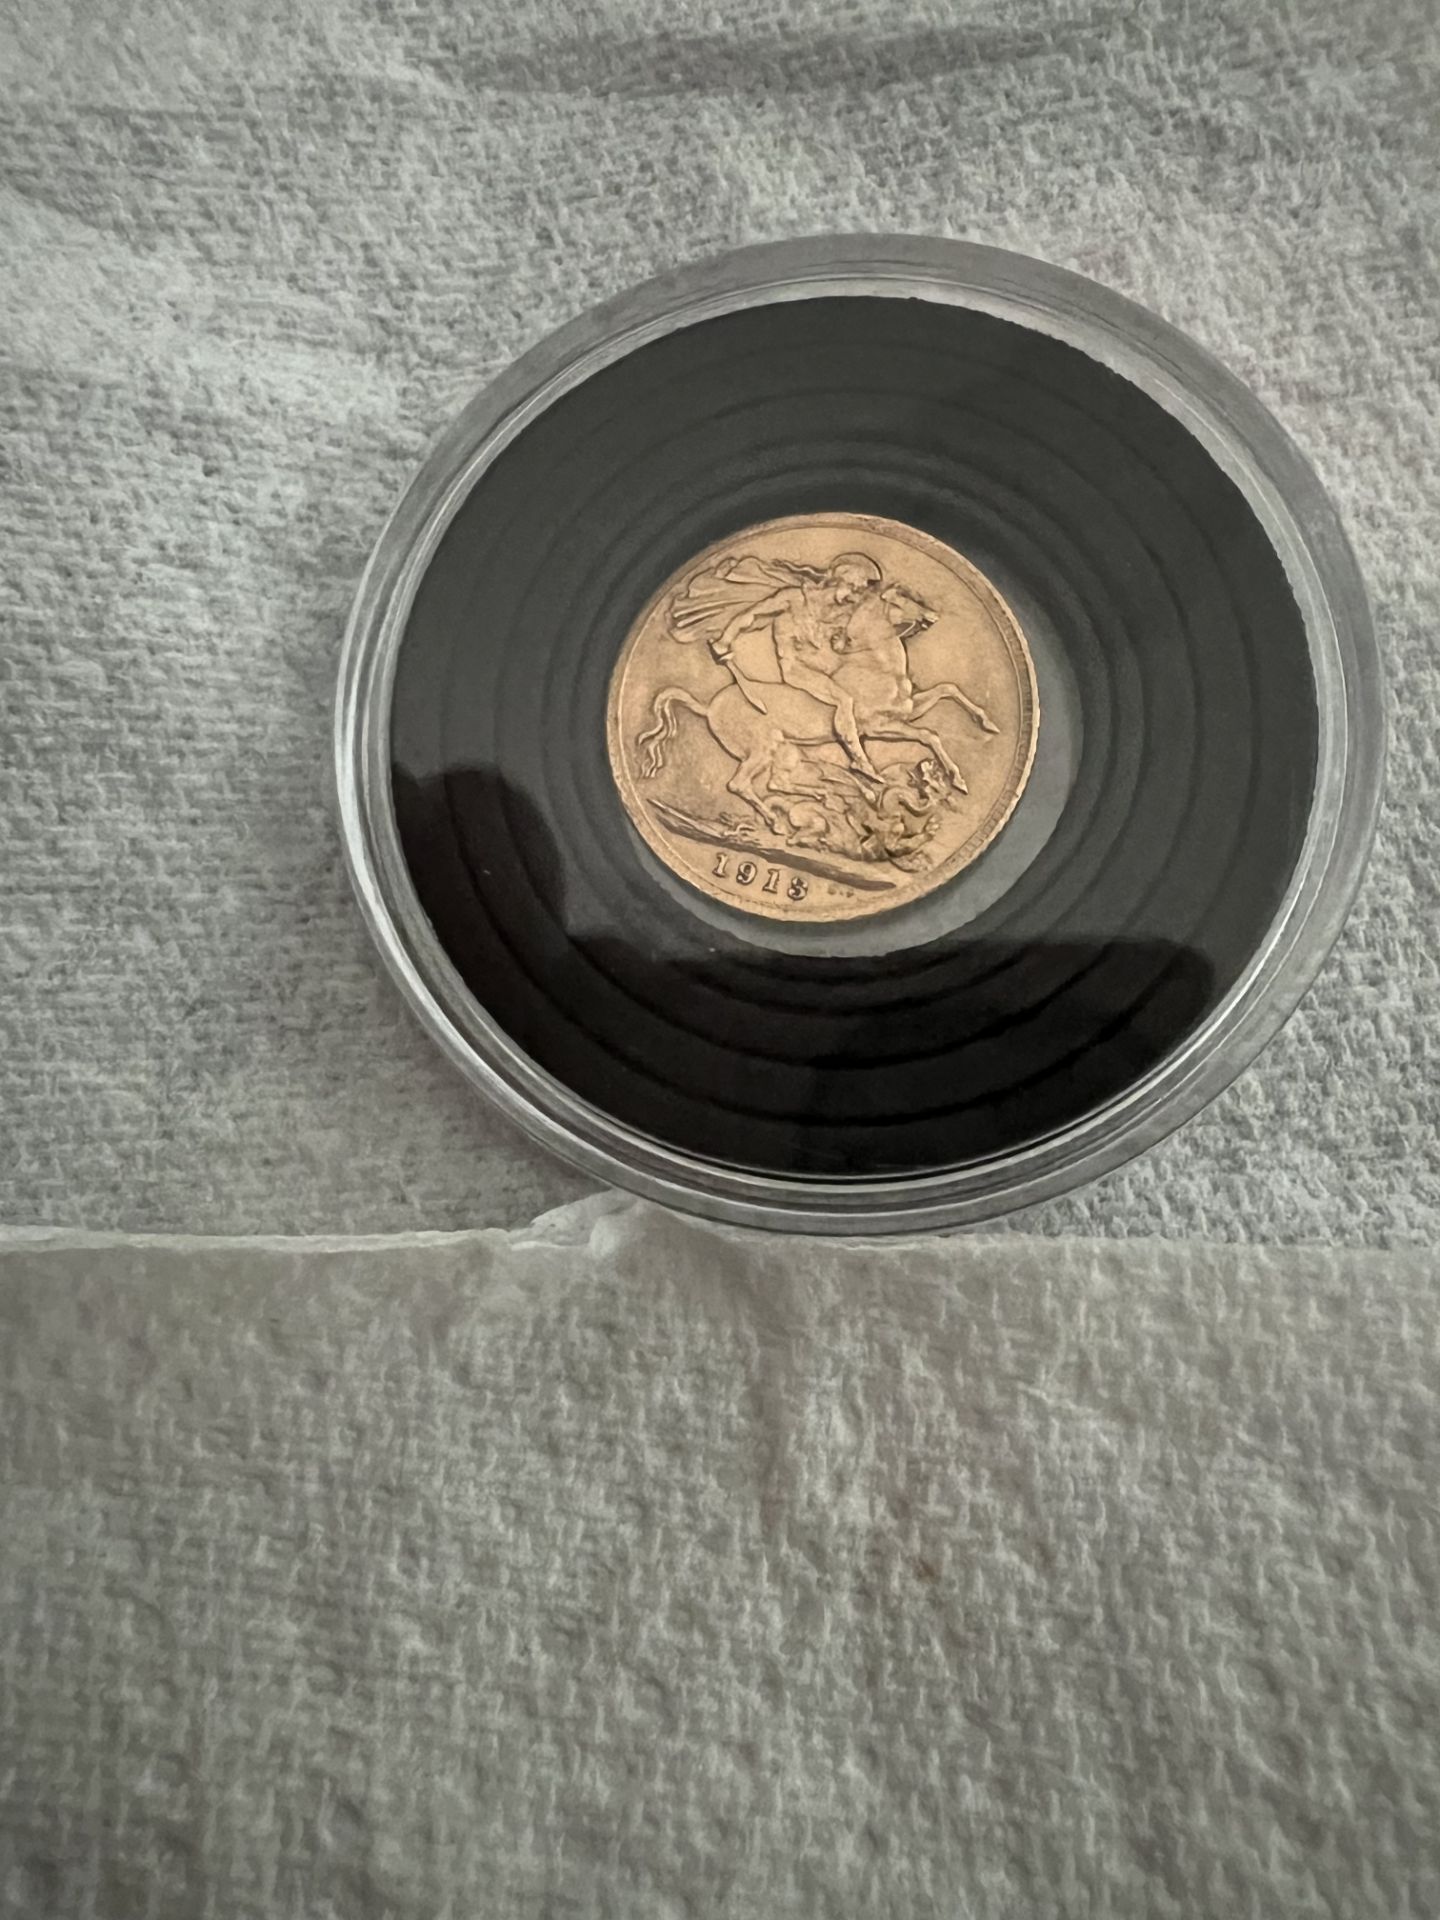 Gold Sovereign - Image 4 of 4